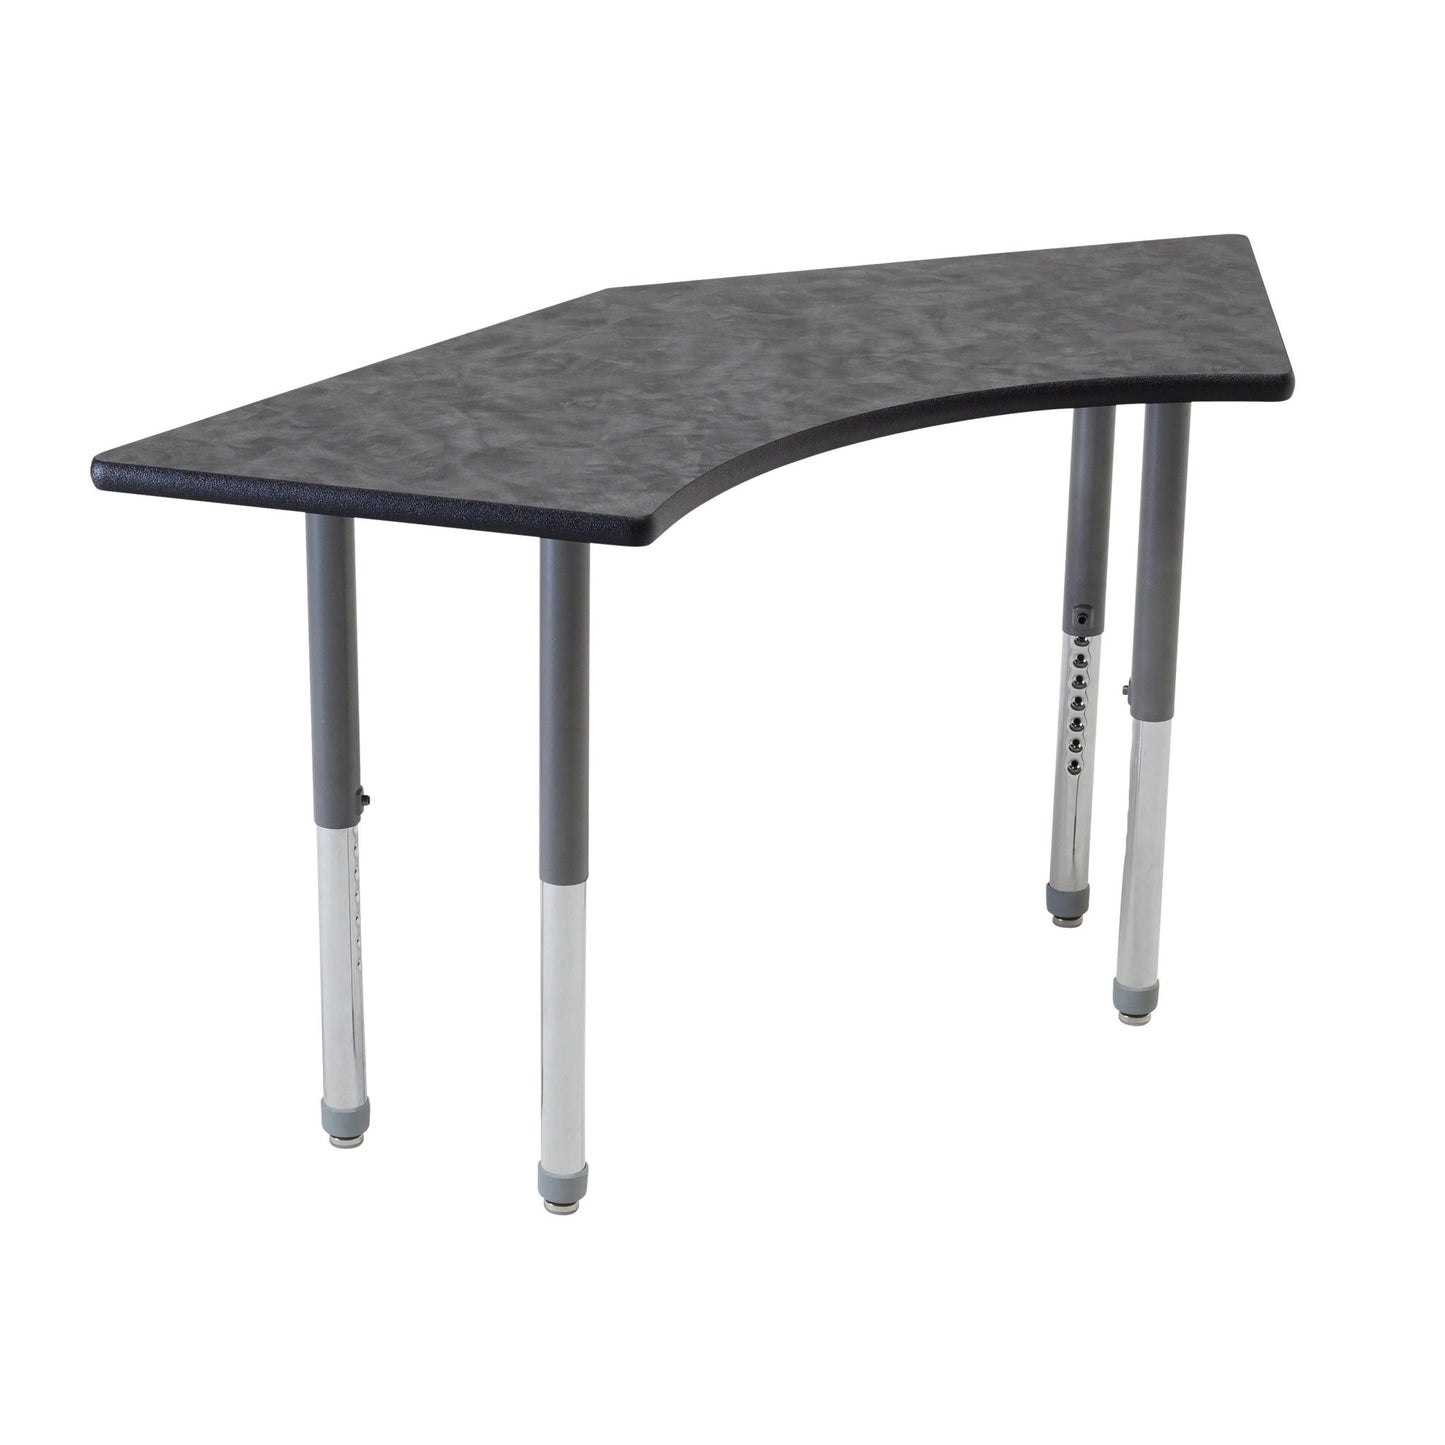 AmTab Multi-Functional Collaborative Activity Table - Creed Collection - Boomerang - 30"W x 60"L (AmTab AMT-AAB305D) - SchoolOutlet